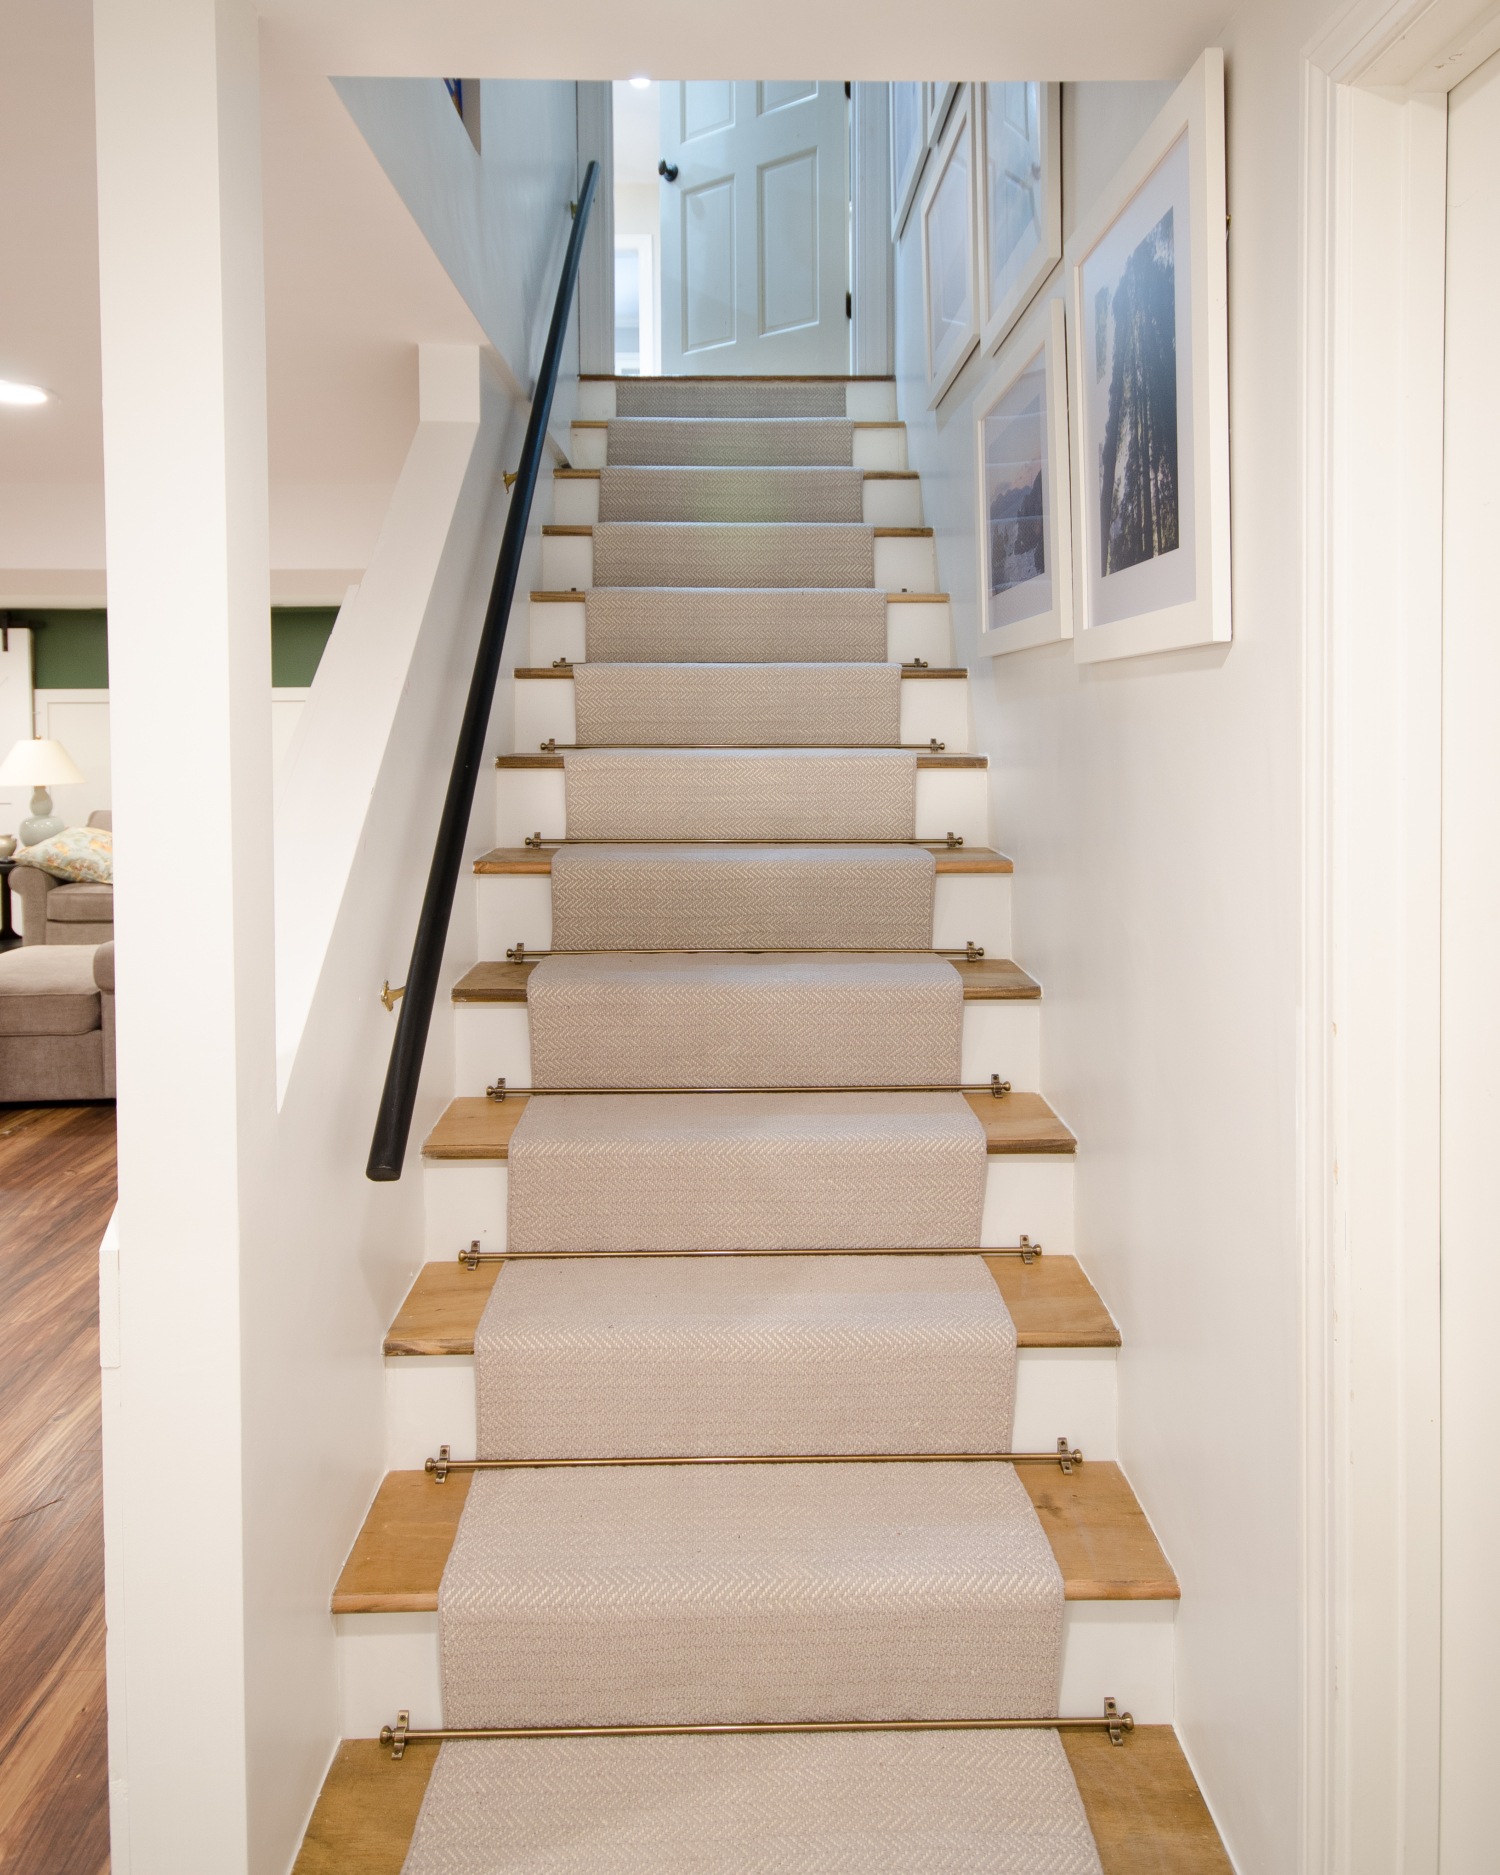 How To Install A Stair Runner The Chronicles Of Home